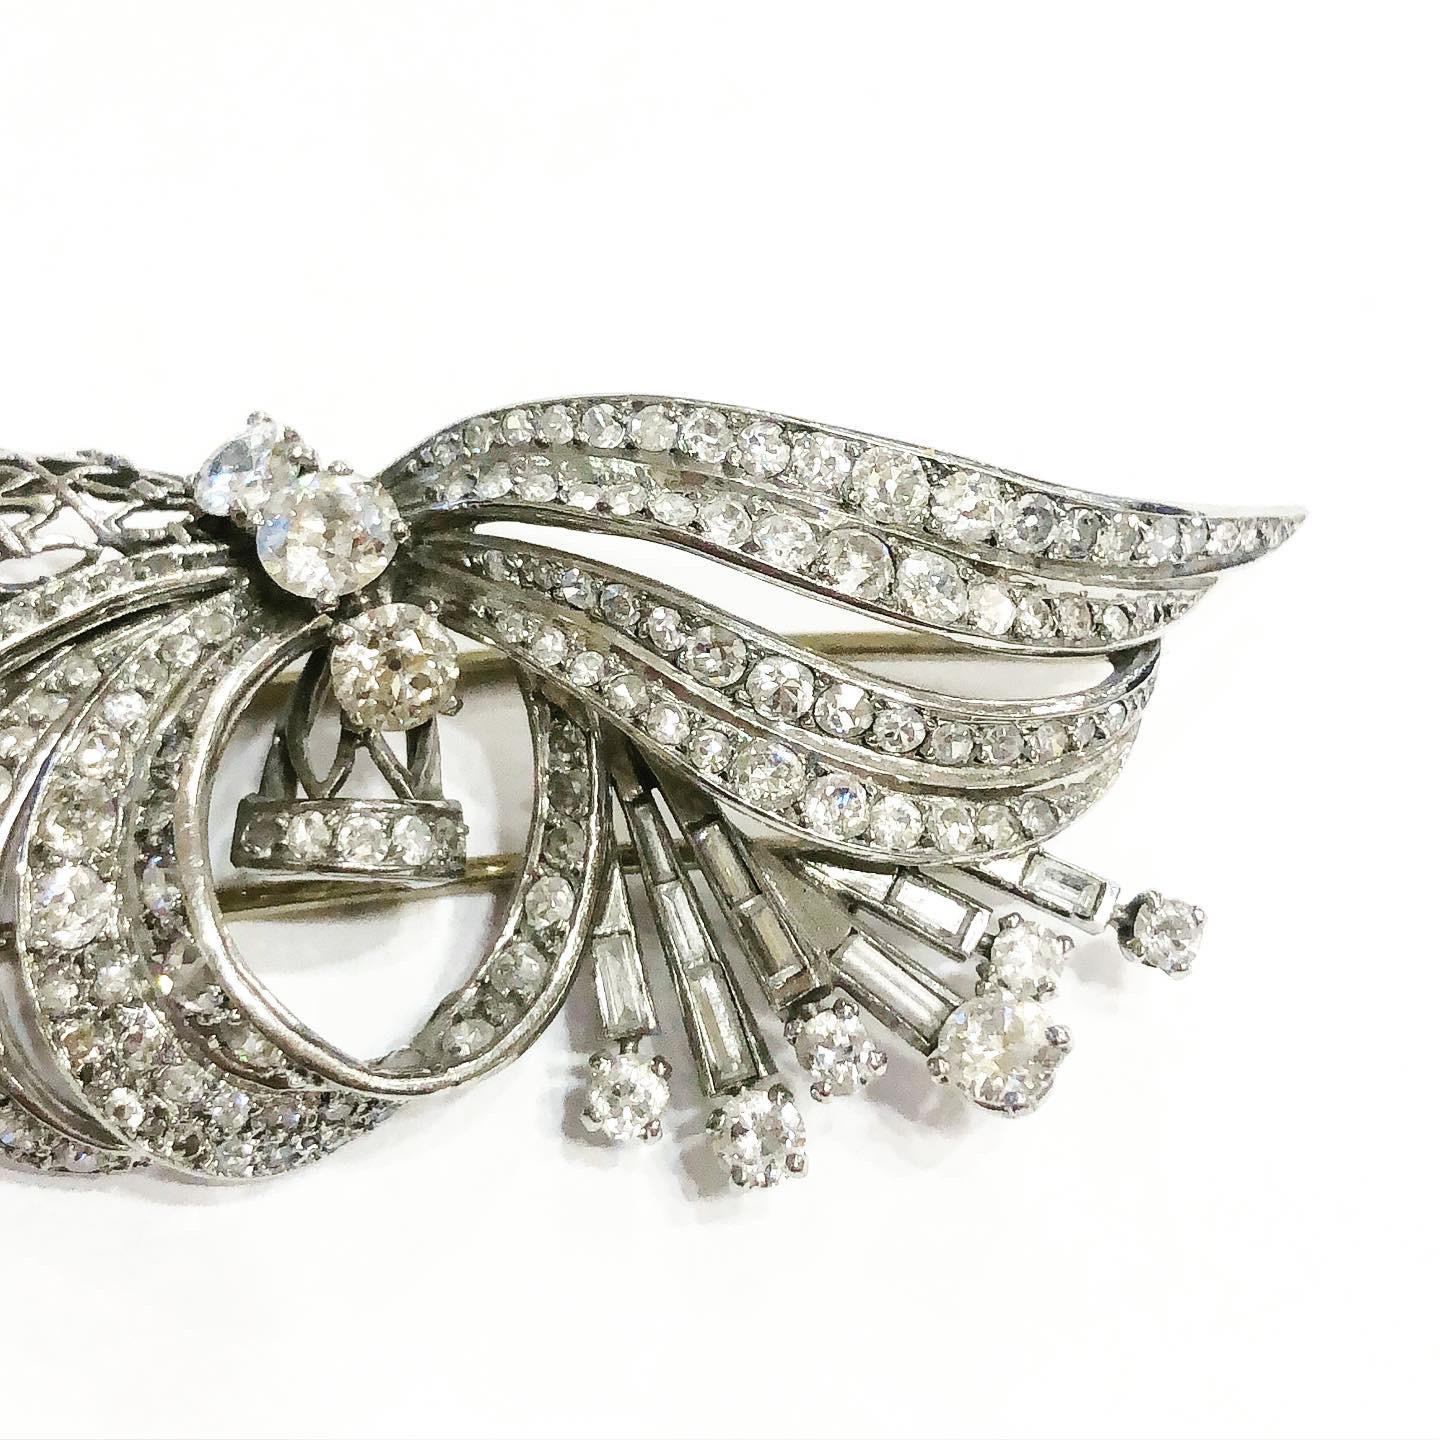 Gorgeous diamonds platinum clip brooch.
France. Retro or tank style.Circa 1940. Condition: Good.
Brilliant-cut, old european cut and baguette diamonds.
Total approximate diamond carat weight: 9.2 carat: Three central 0,56+0,35+0,5 carats and 7,8 for